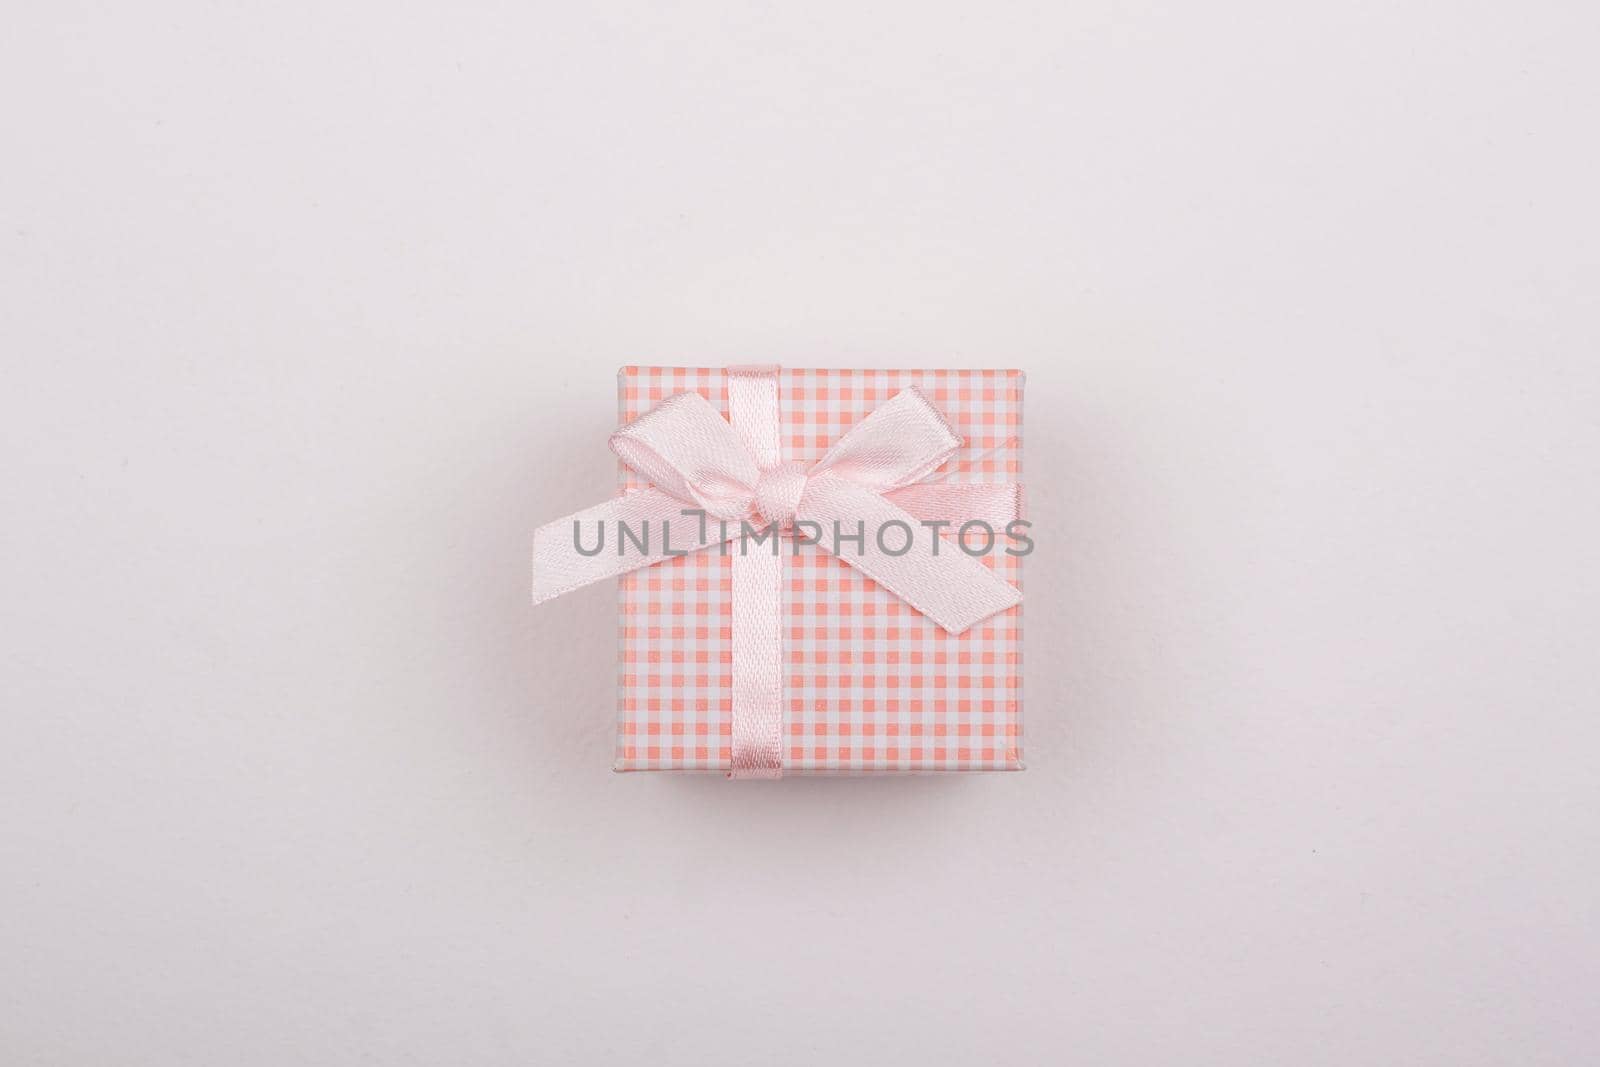 Pink gift with bow on a white background.